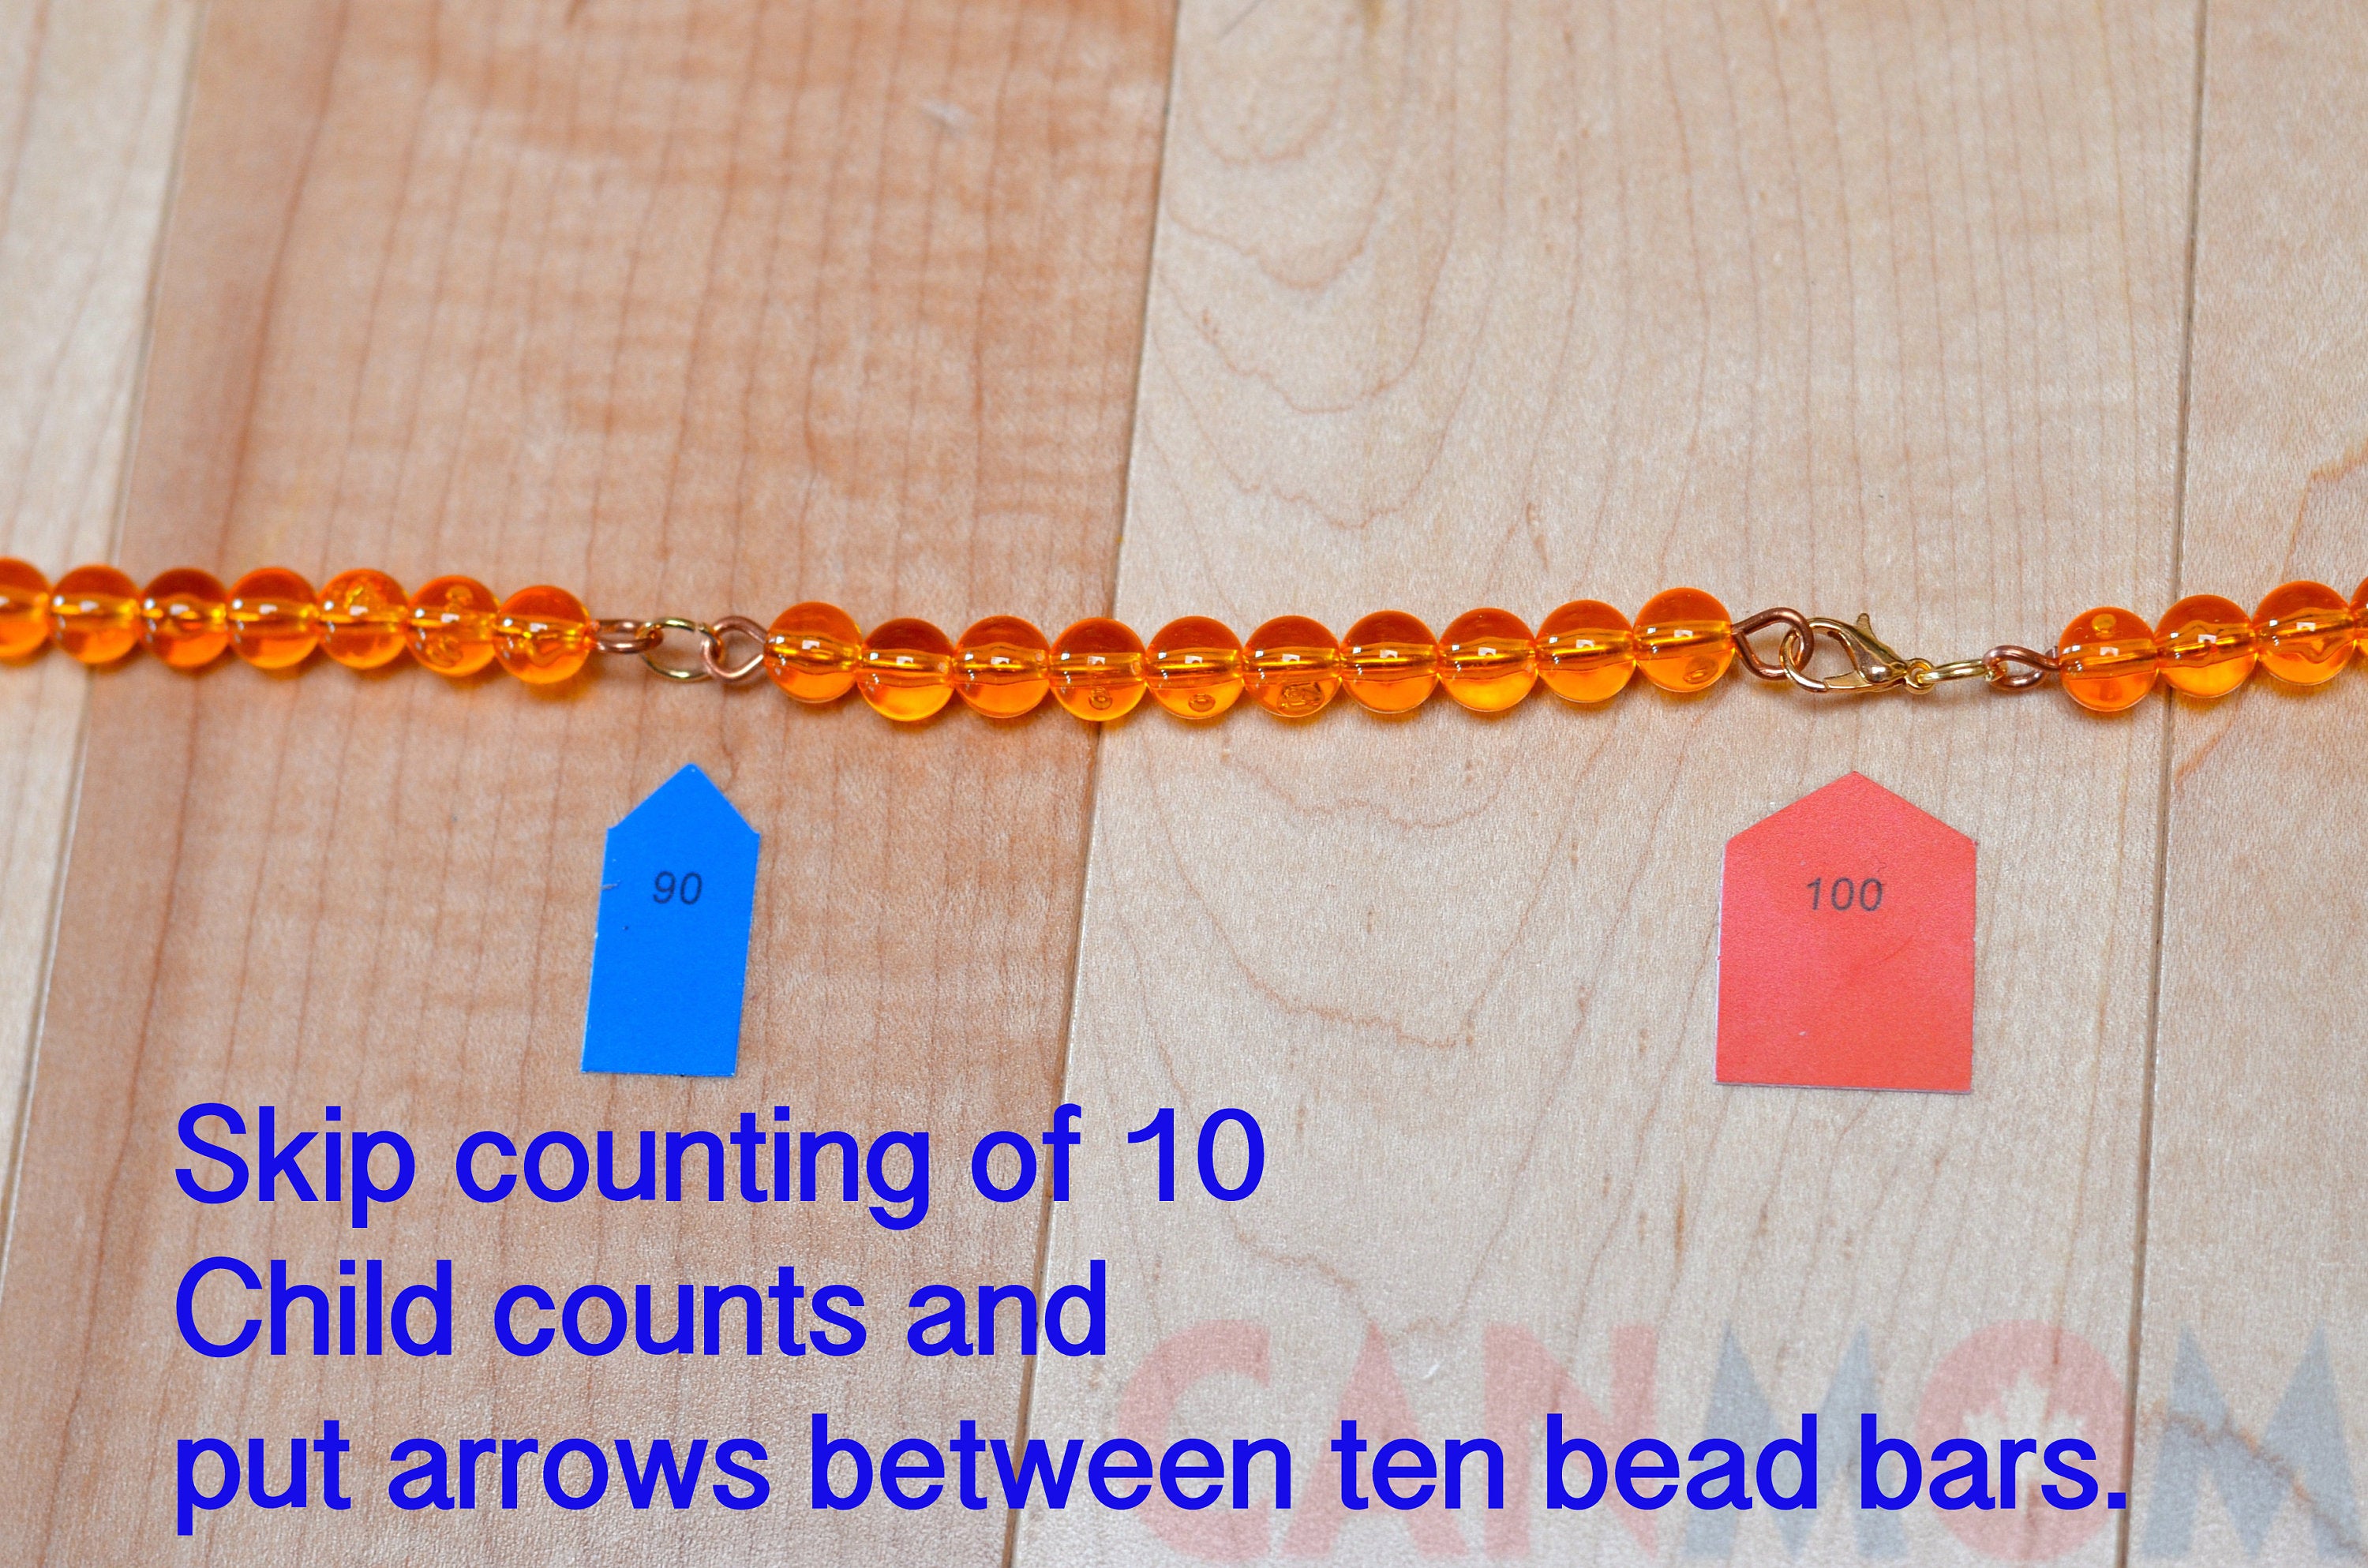 Montessori 1-1000 bead chains / Math educational learning material / skip counting 10 learning / homeschooler / times table